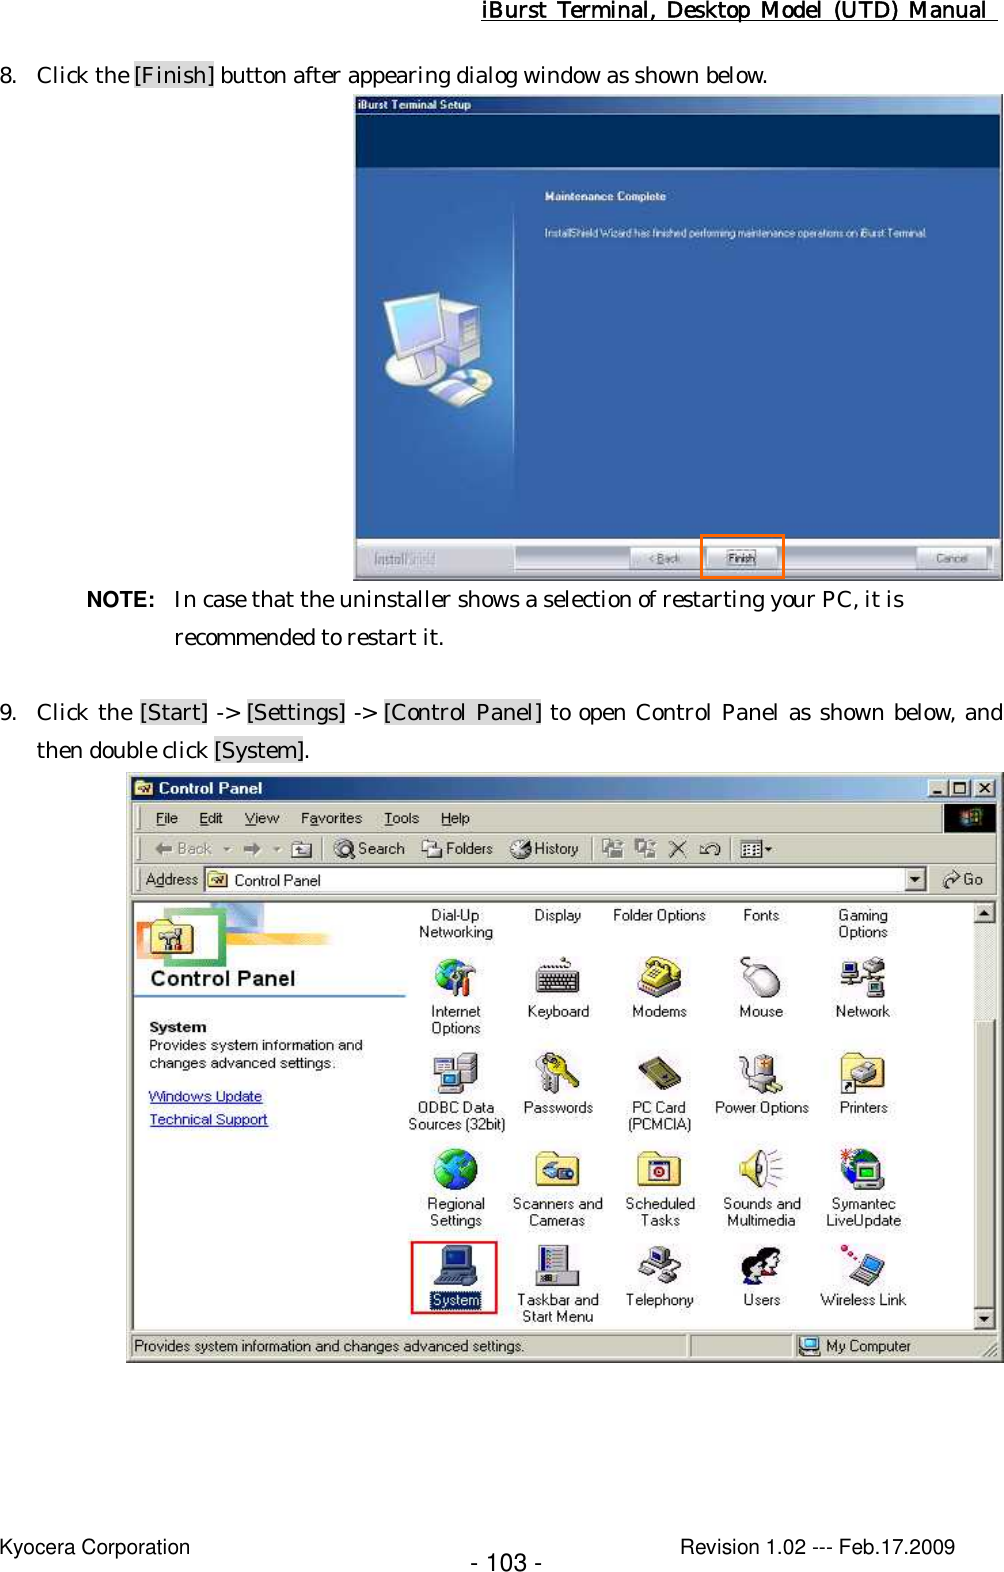 iBurst  Terminal, Desktop  Model  (UTD)  Manual    Kyocera Corporation                                                                                              Revision 1.02 --- Feb.17.2009 - 103 - 8. Click the [Finish] button after appearing dialog window as shown below.  NOTE:  In case that the uninstaller shows a selection of restarting your PC, it is recommended to restart it.  9. Click the [Start] -&gt; [Settings] -&gt; [Control Panel] to open Control Panel as shown below, and then double click [System].   